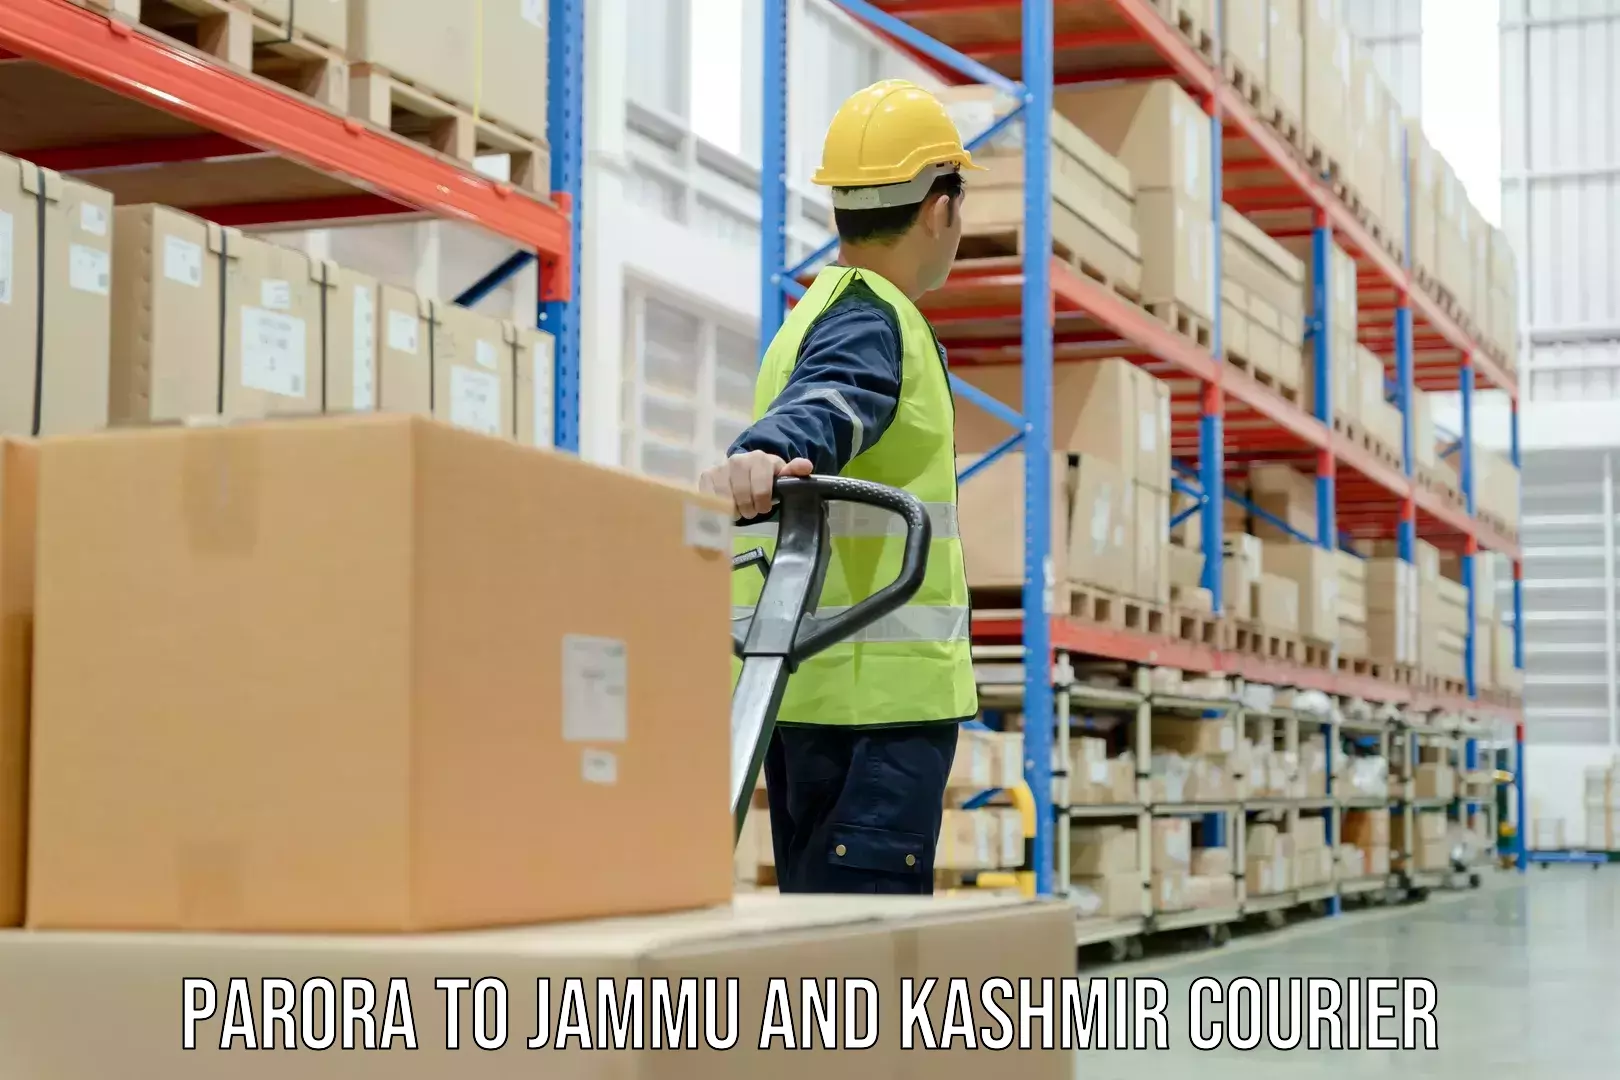 Global shipping networks Parora to Jammu and Kashmir